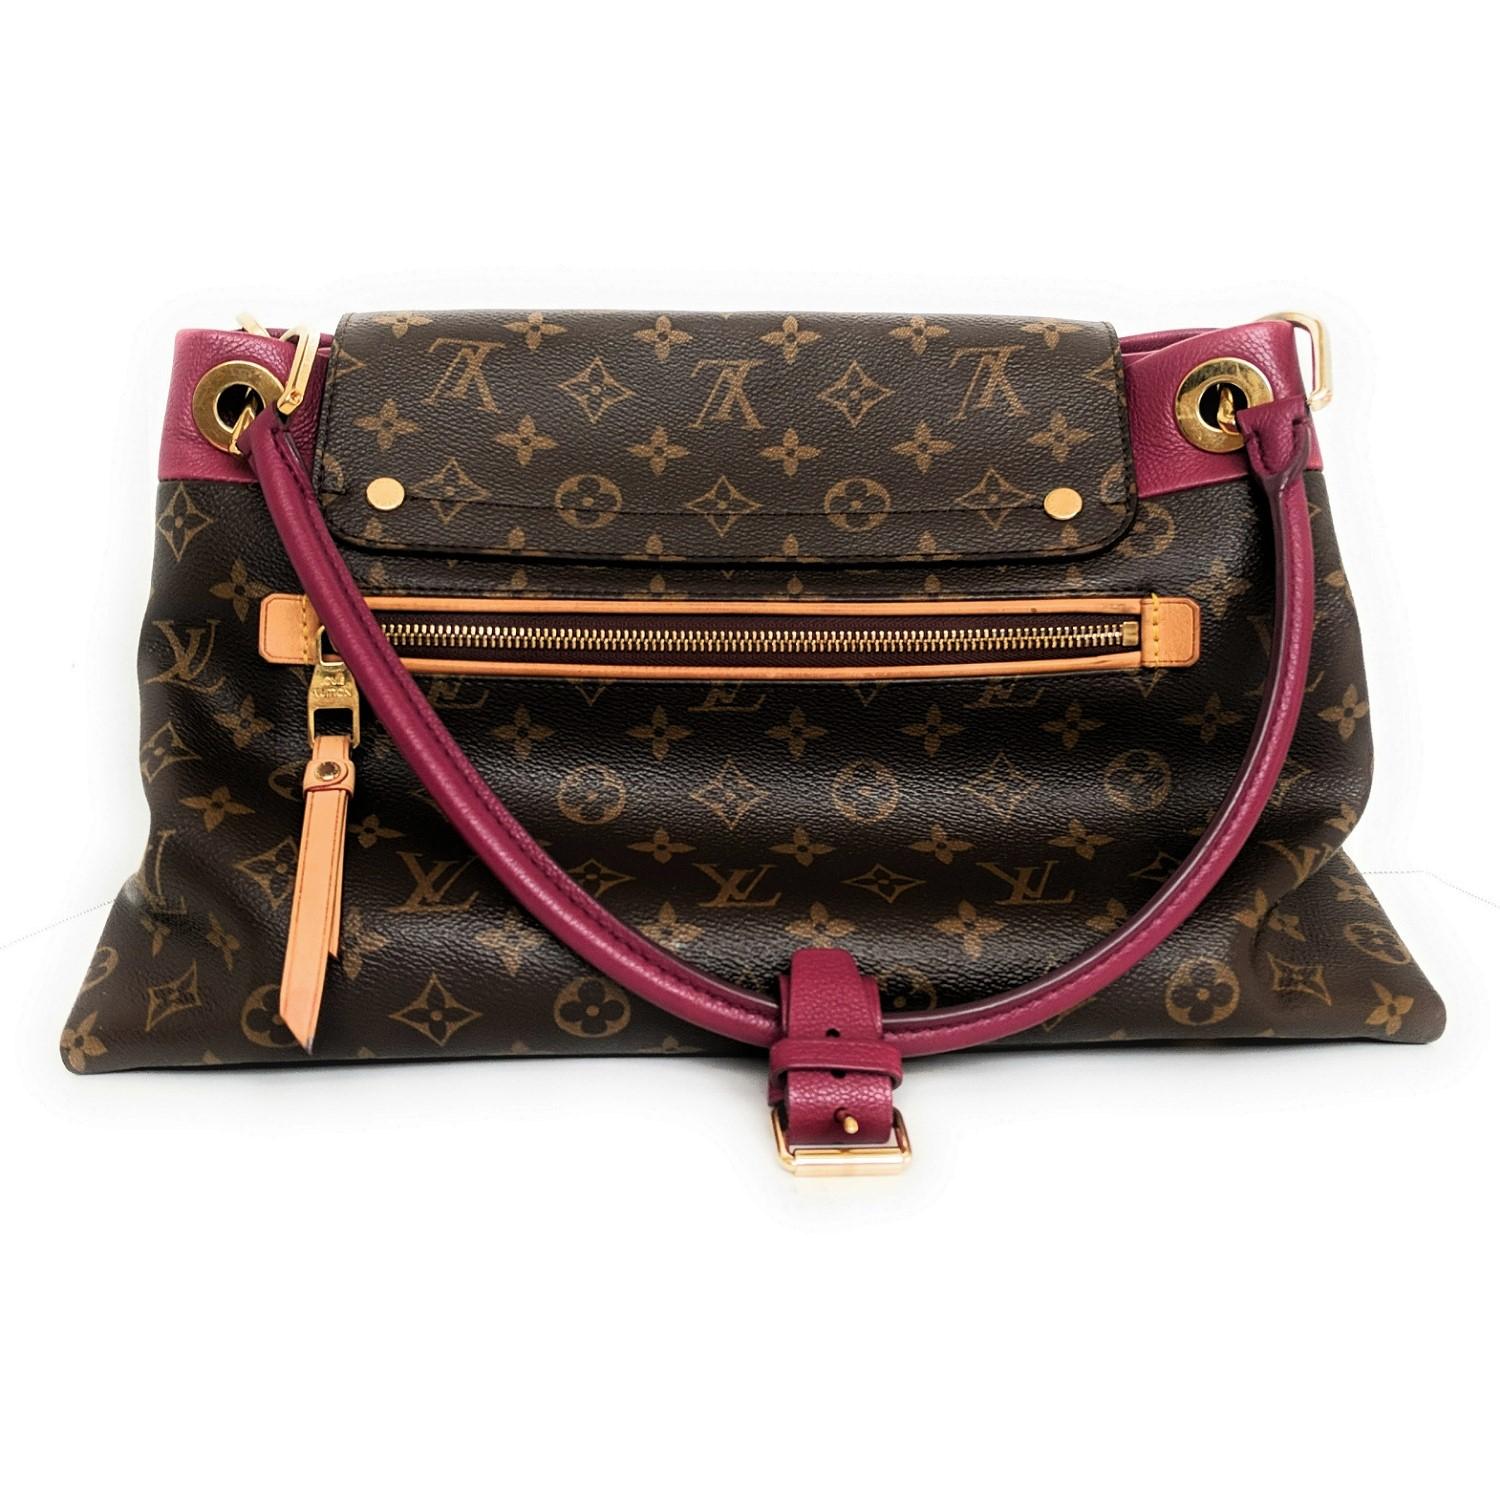 A newer creation from Louis Vuitton, the Olympe is a refined and sophisticated tote that will be treasured for years to come. Taking inspiration from Louis Vuitton luxurious heritage, the Olympe is a blend of the iconic Monogram canvas and supple